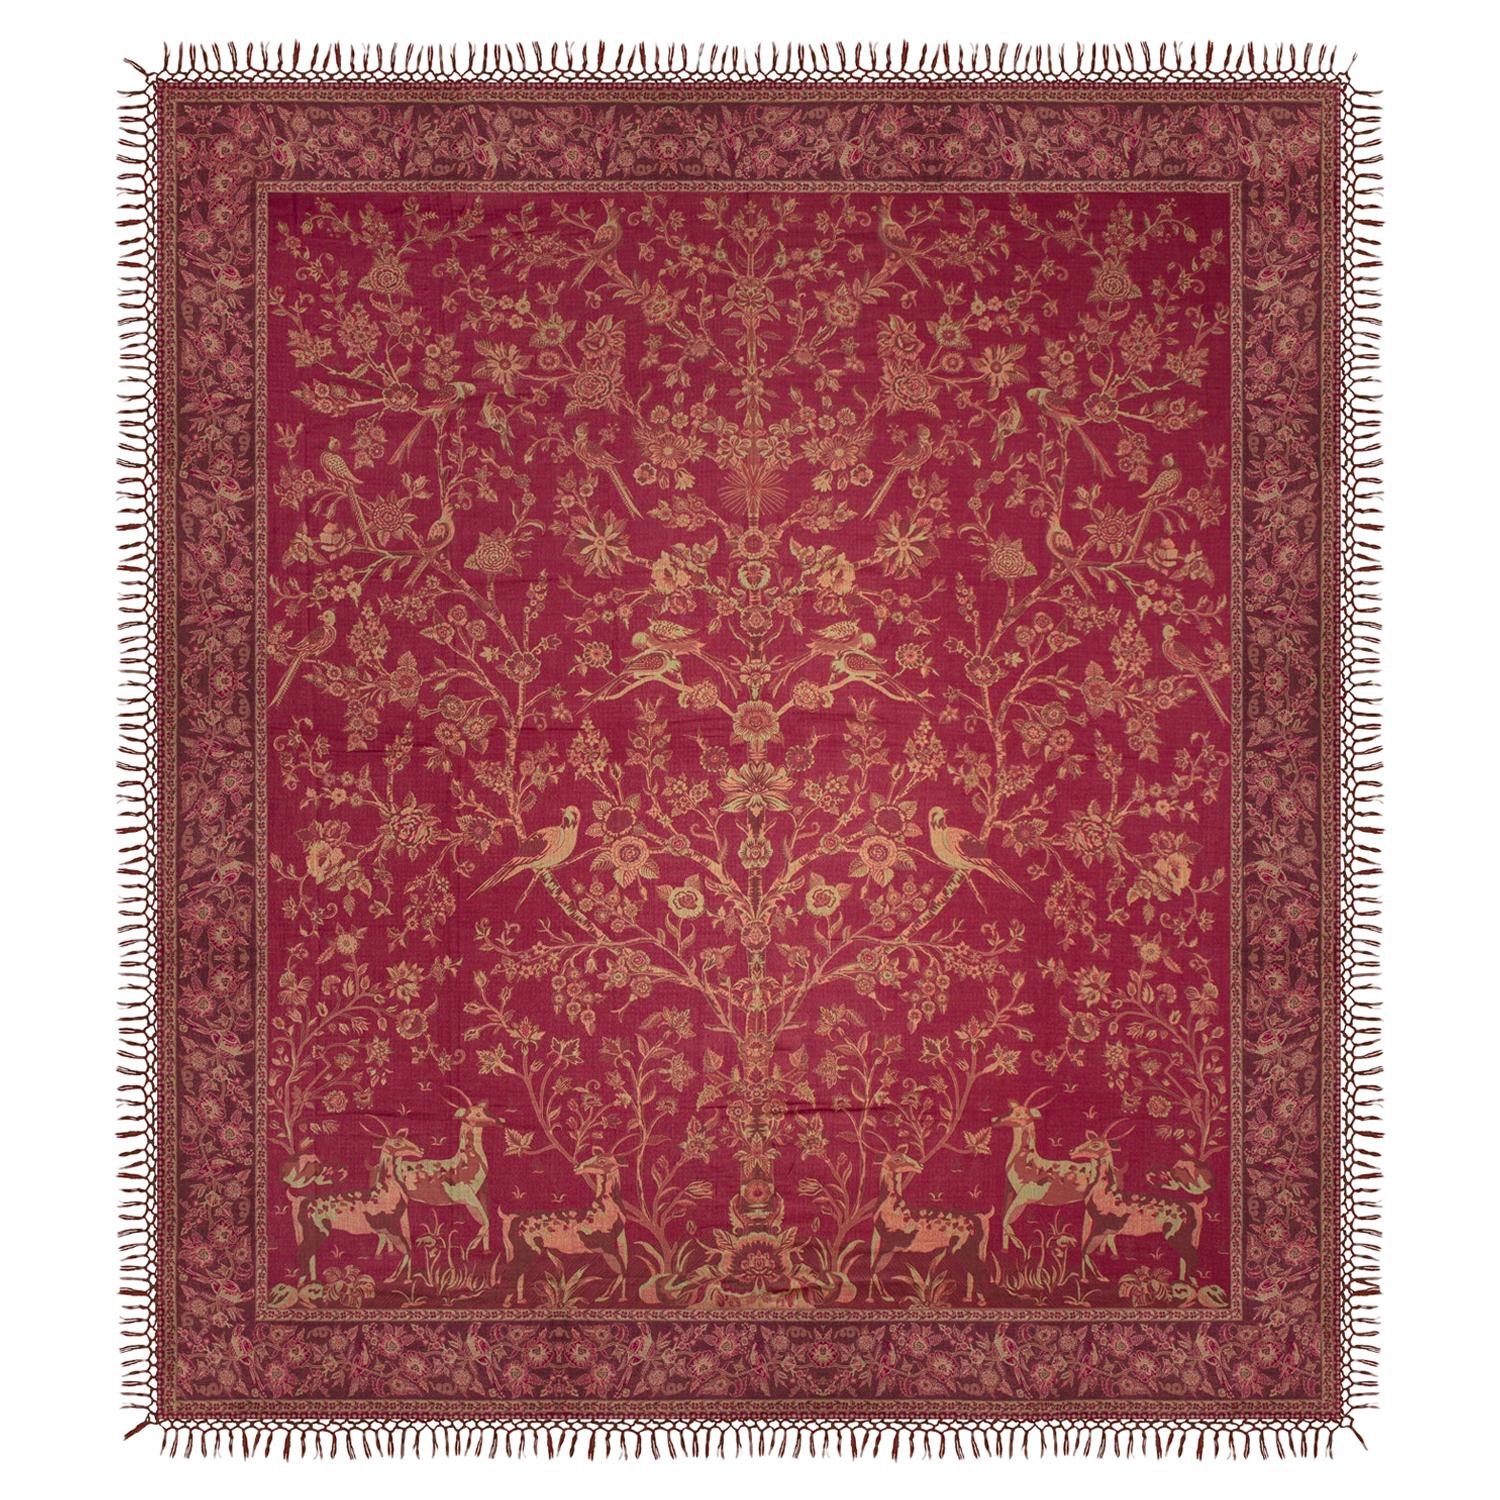 Ruby Red from Kashmir, a Cashmere Pashmina Tree of Life Coverlet or Shawl